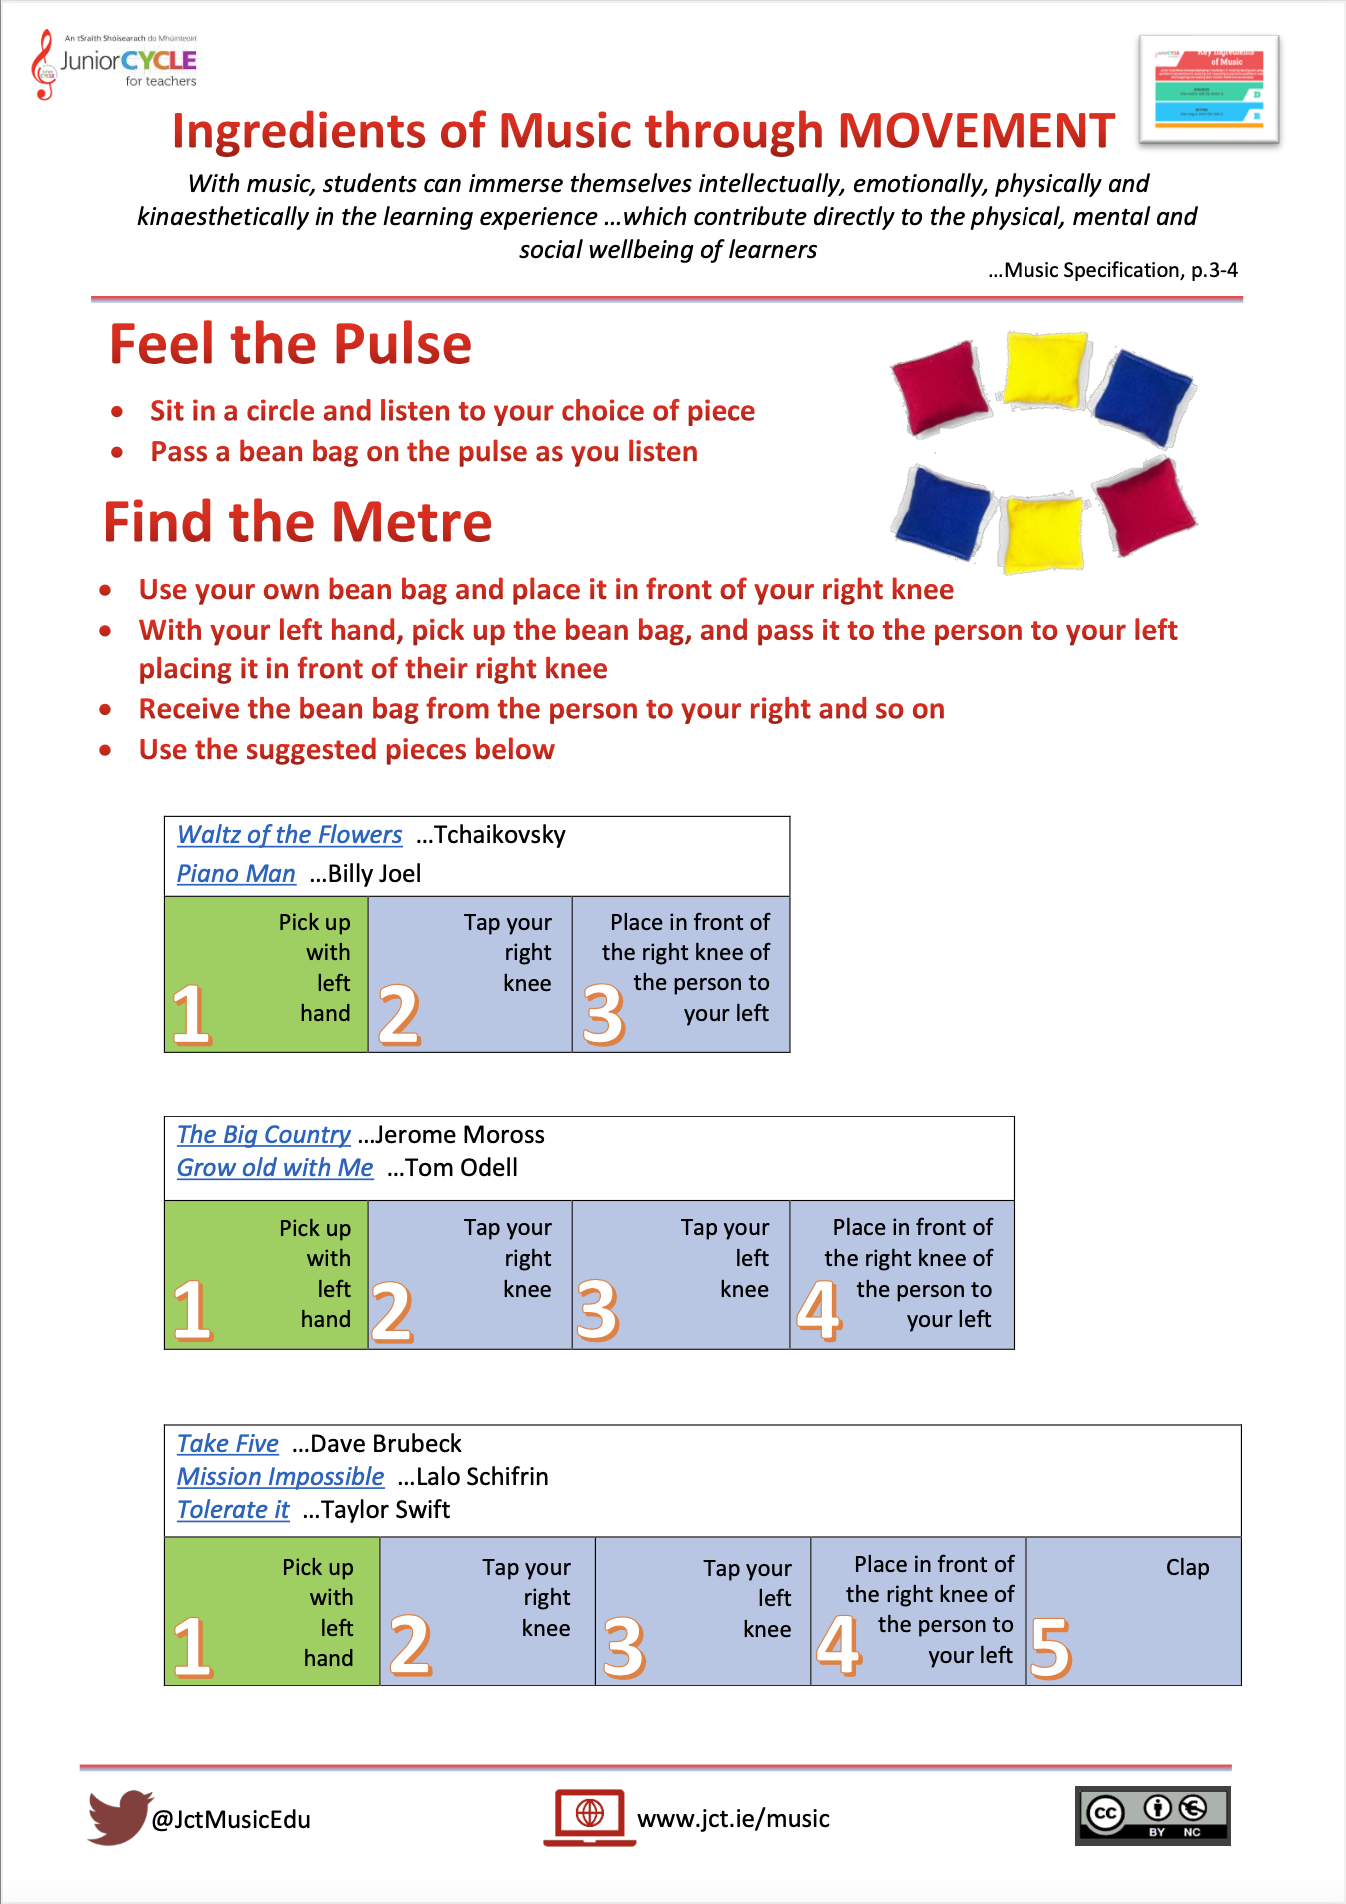 Ingredients of Music through MOVEMENT - Pulse and Metre